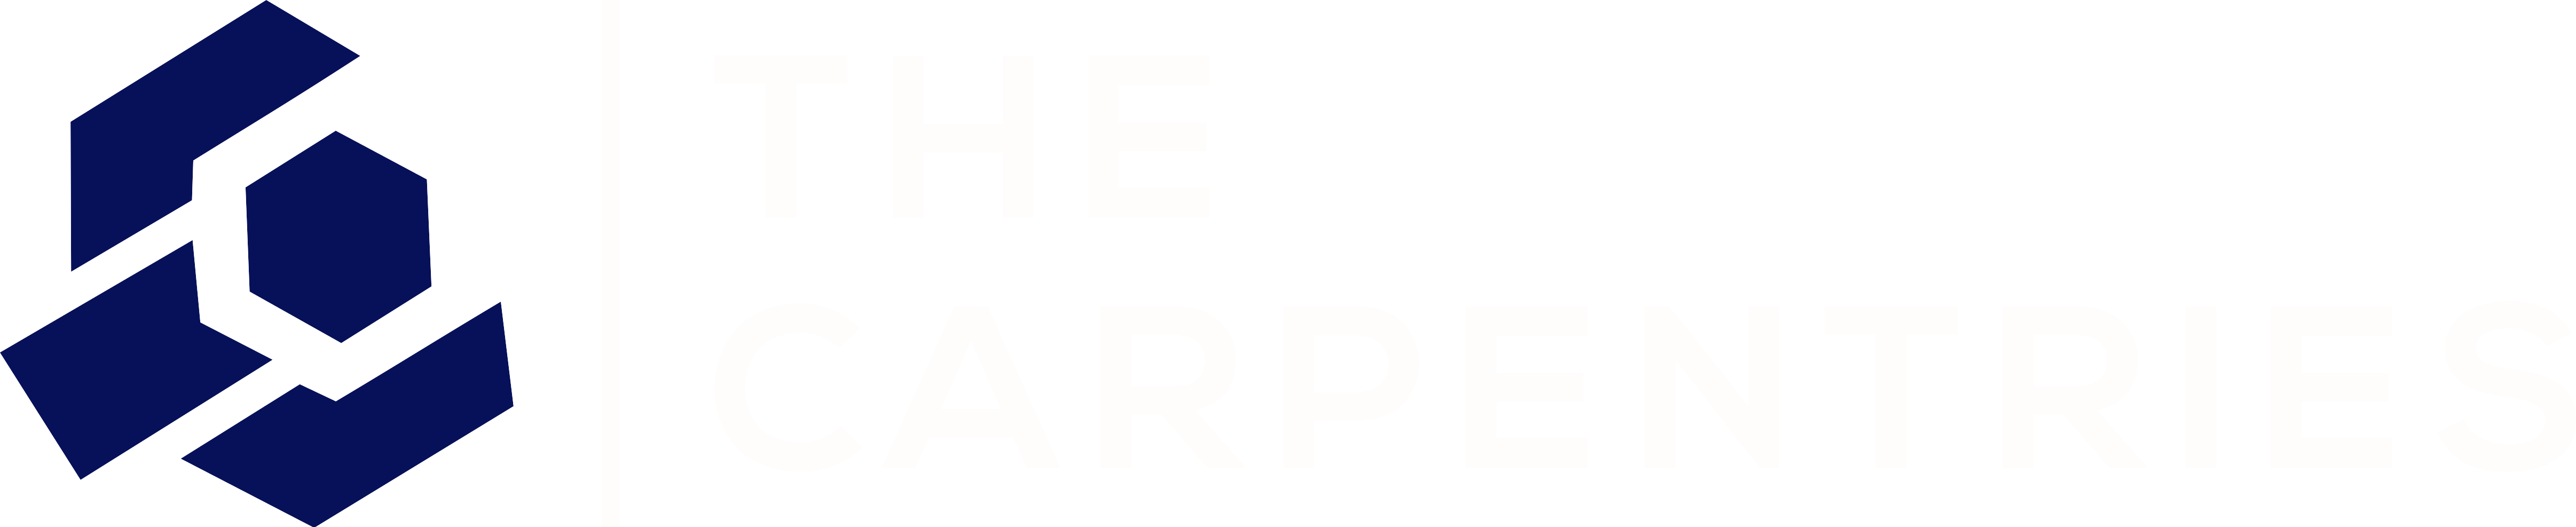 TheCarpentries_white.png